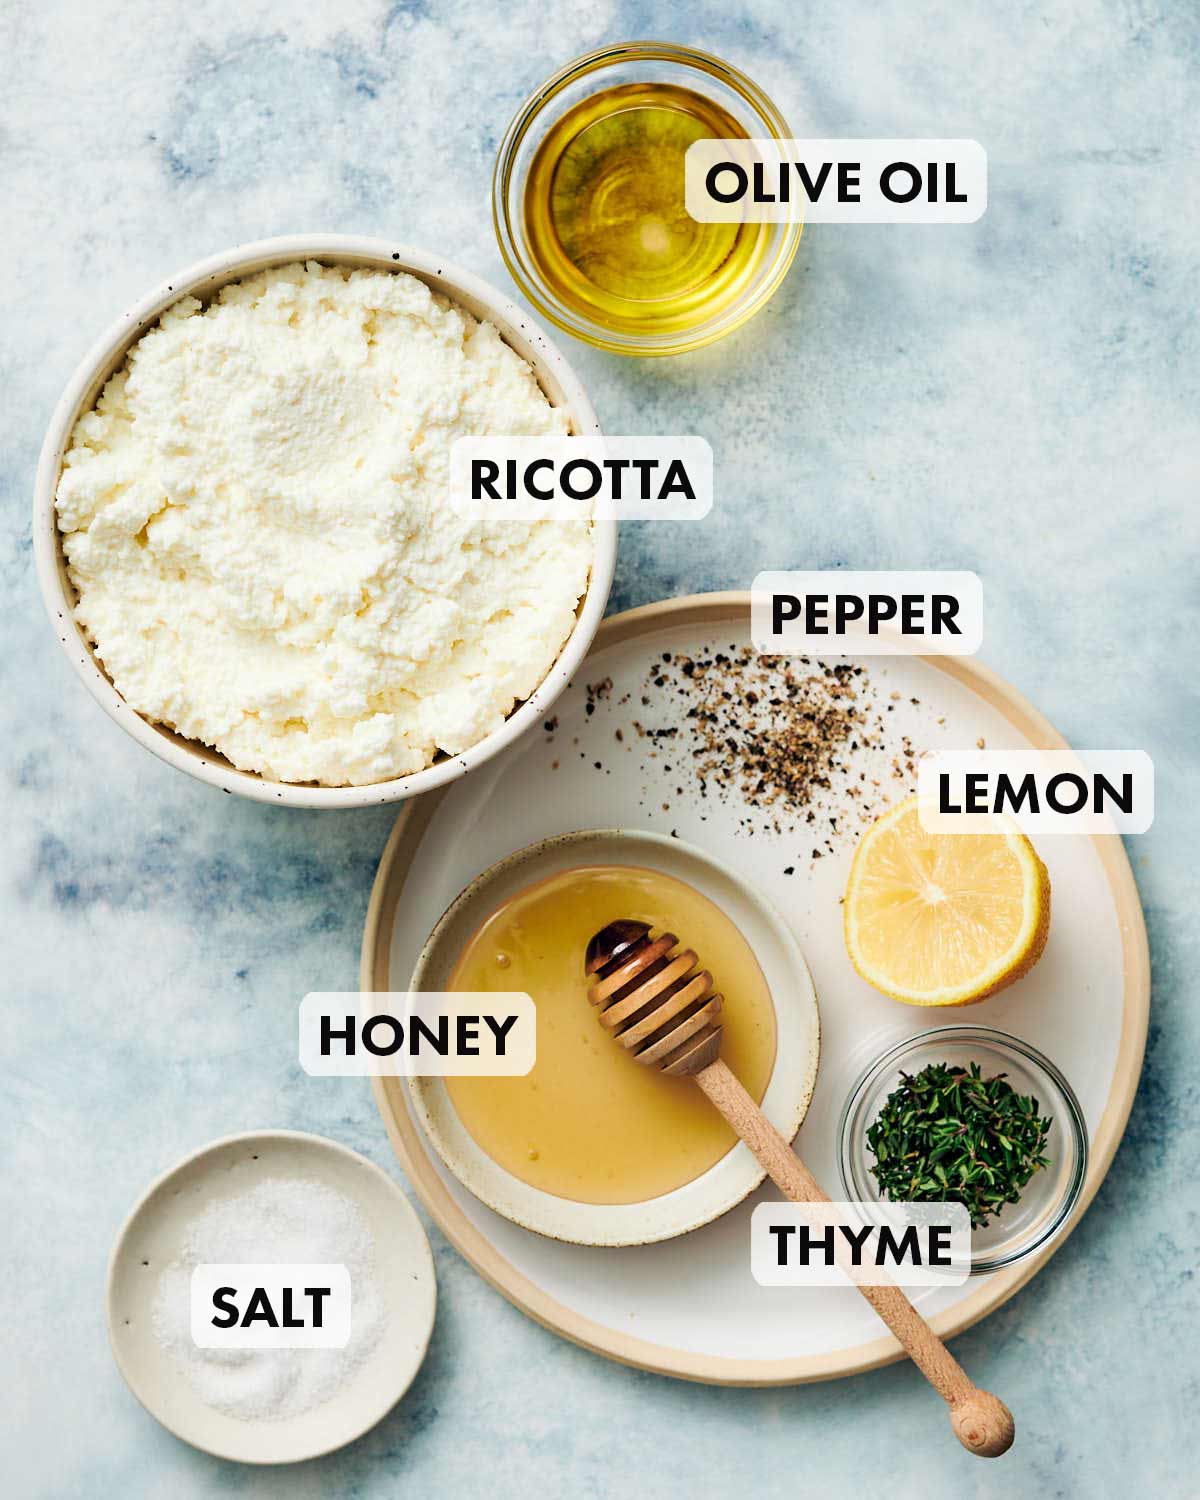 Ingredients to make whipped ricotta dip, imcluding honey and thyme.